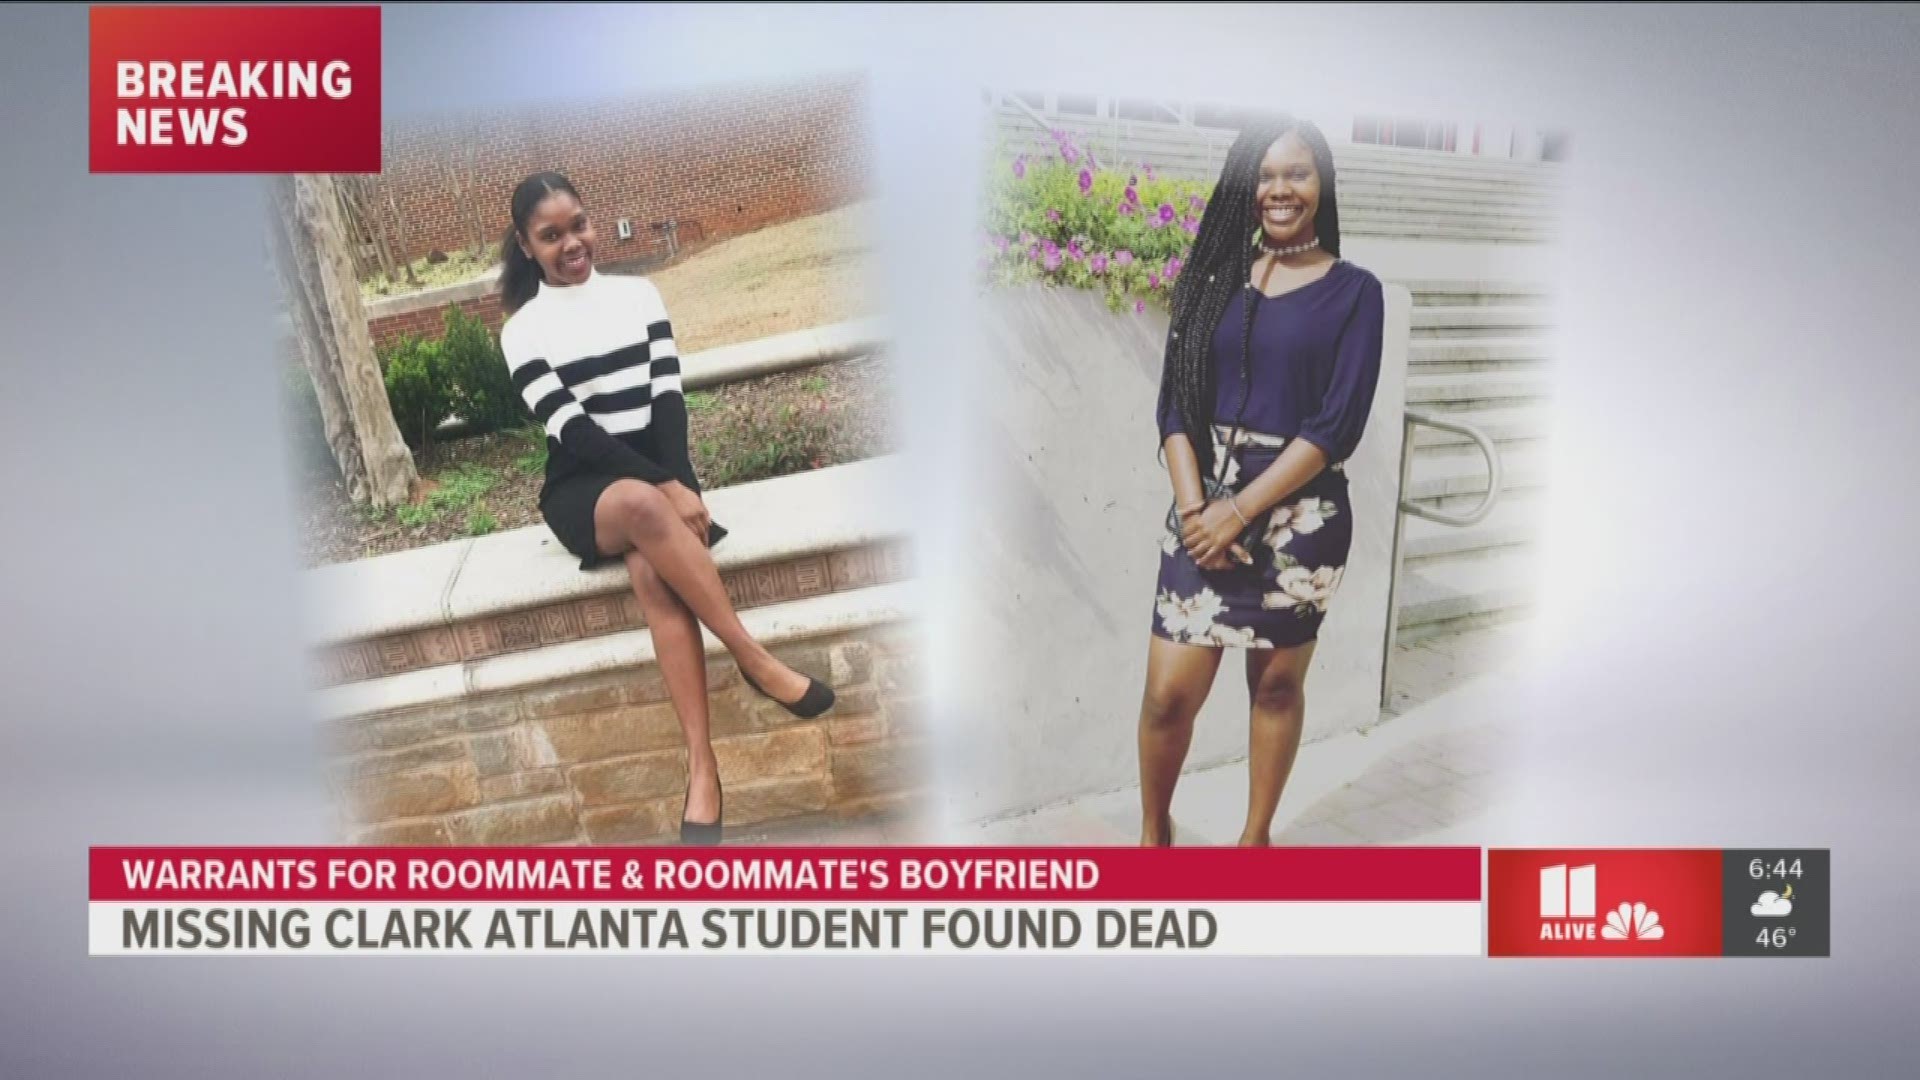 Clark Atlanta University Senior Alexis Crawford filed a sexual assault report against her roommate's boyfriend days before being reported missing.